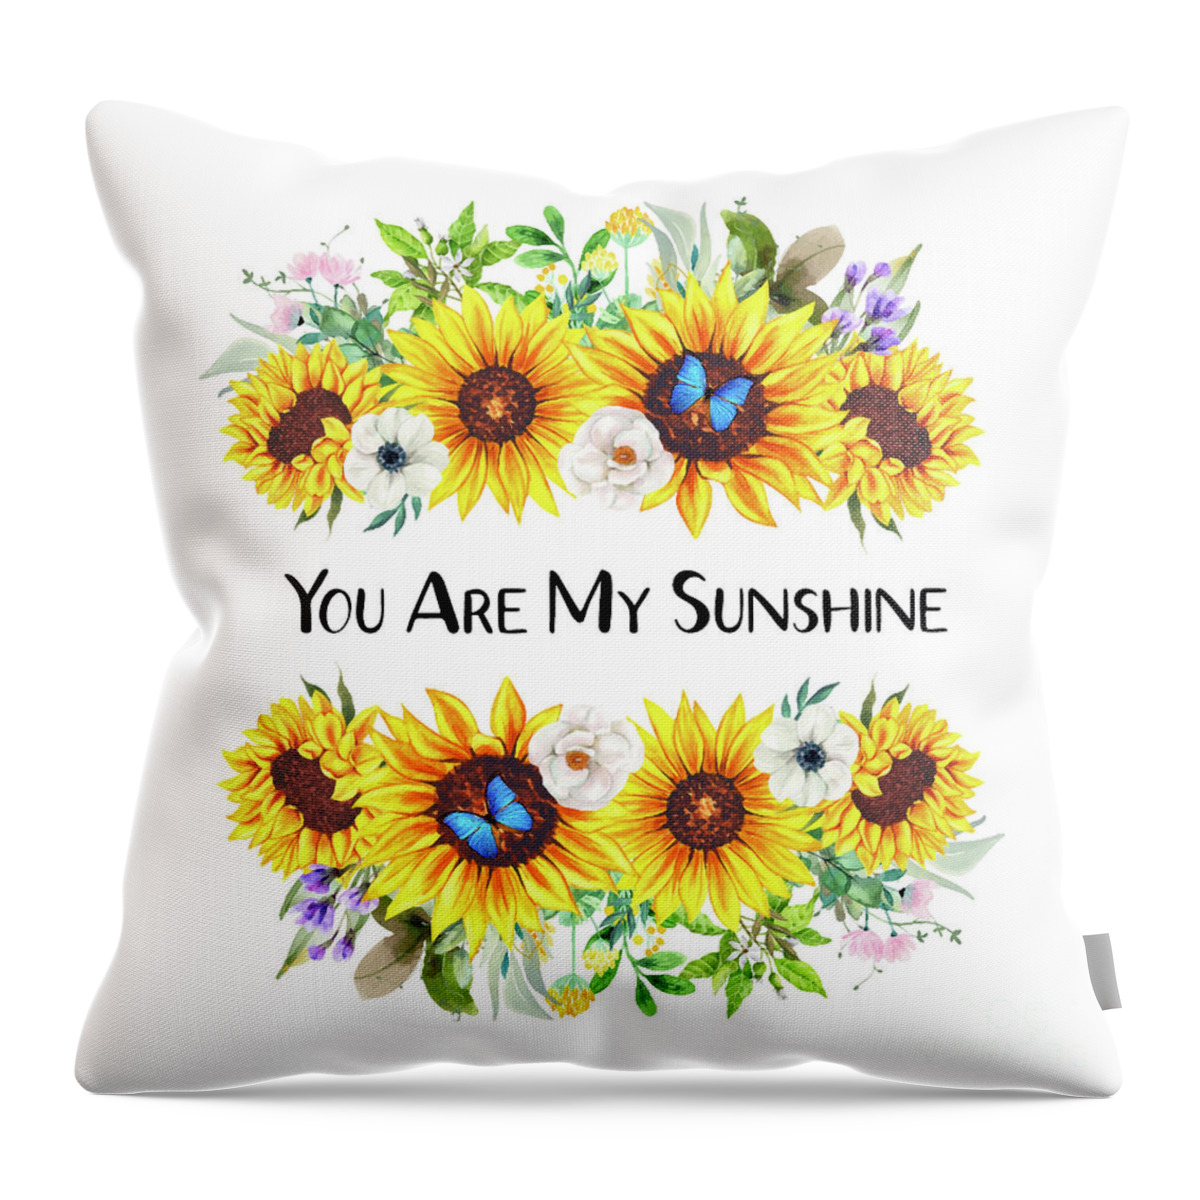 Sunflowers Throw Pillow featuring the painting You Are My Sunshine by Tina LeCour